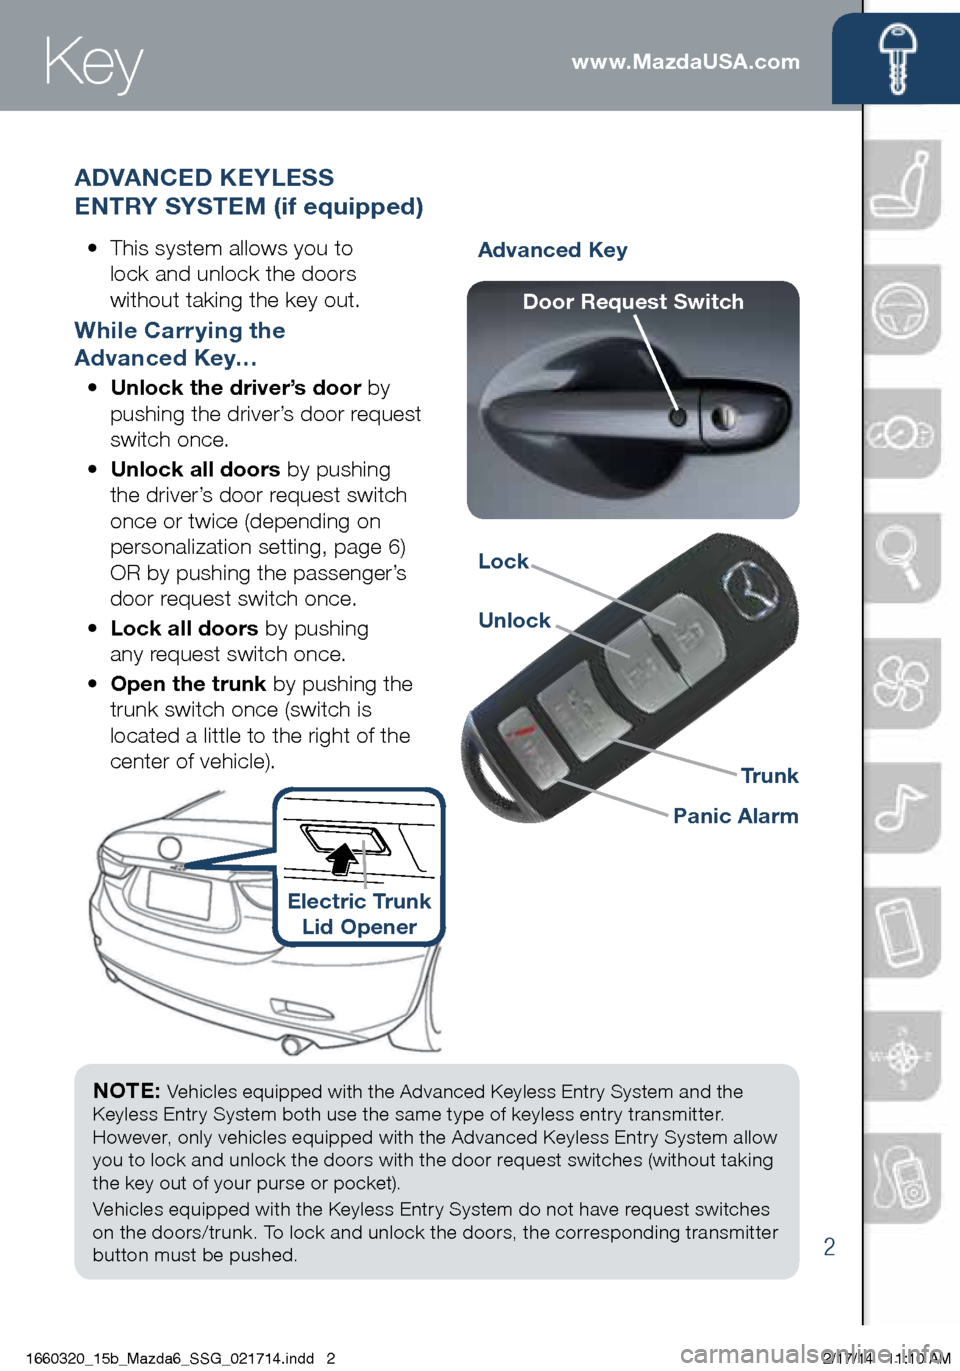 MAZDA MODEL 6 2015  Smart Start Guide (in English) 2
www.MazdaUSA.com
NOTE: Vehicles equipped with the Advanced Keyless Entry System and the 
Keyless Entry System both use the same type of keyless entry transmitter. 
However, only vehicles equipped wi